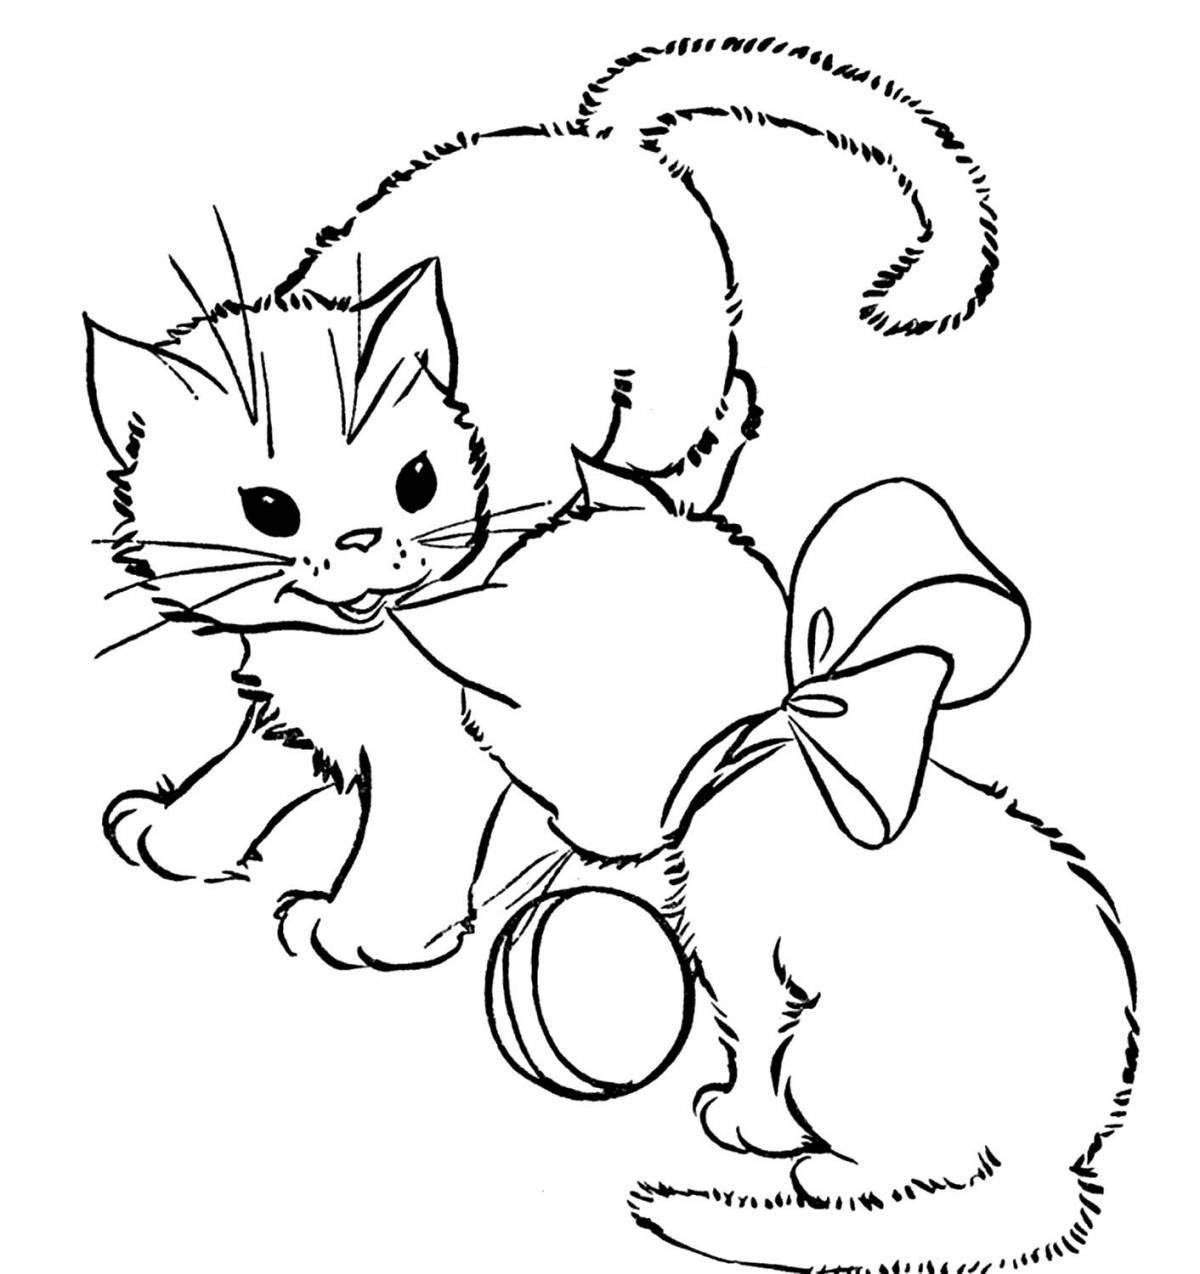 Coloring page clever cat with a ball